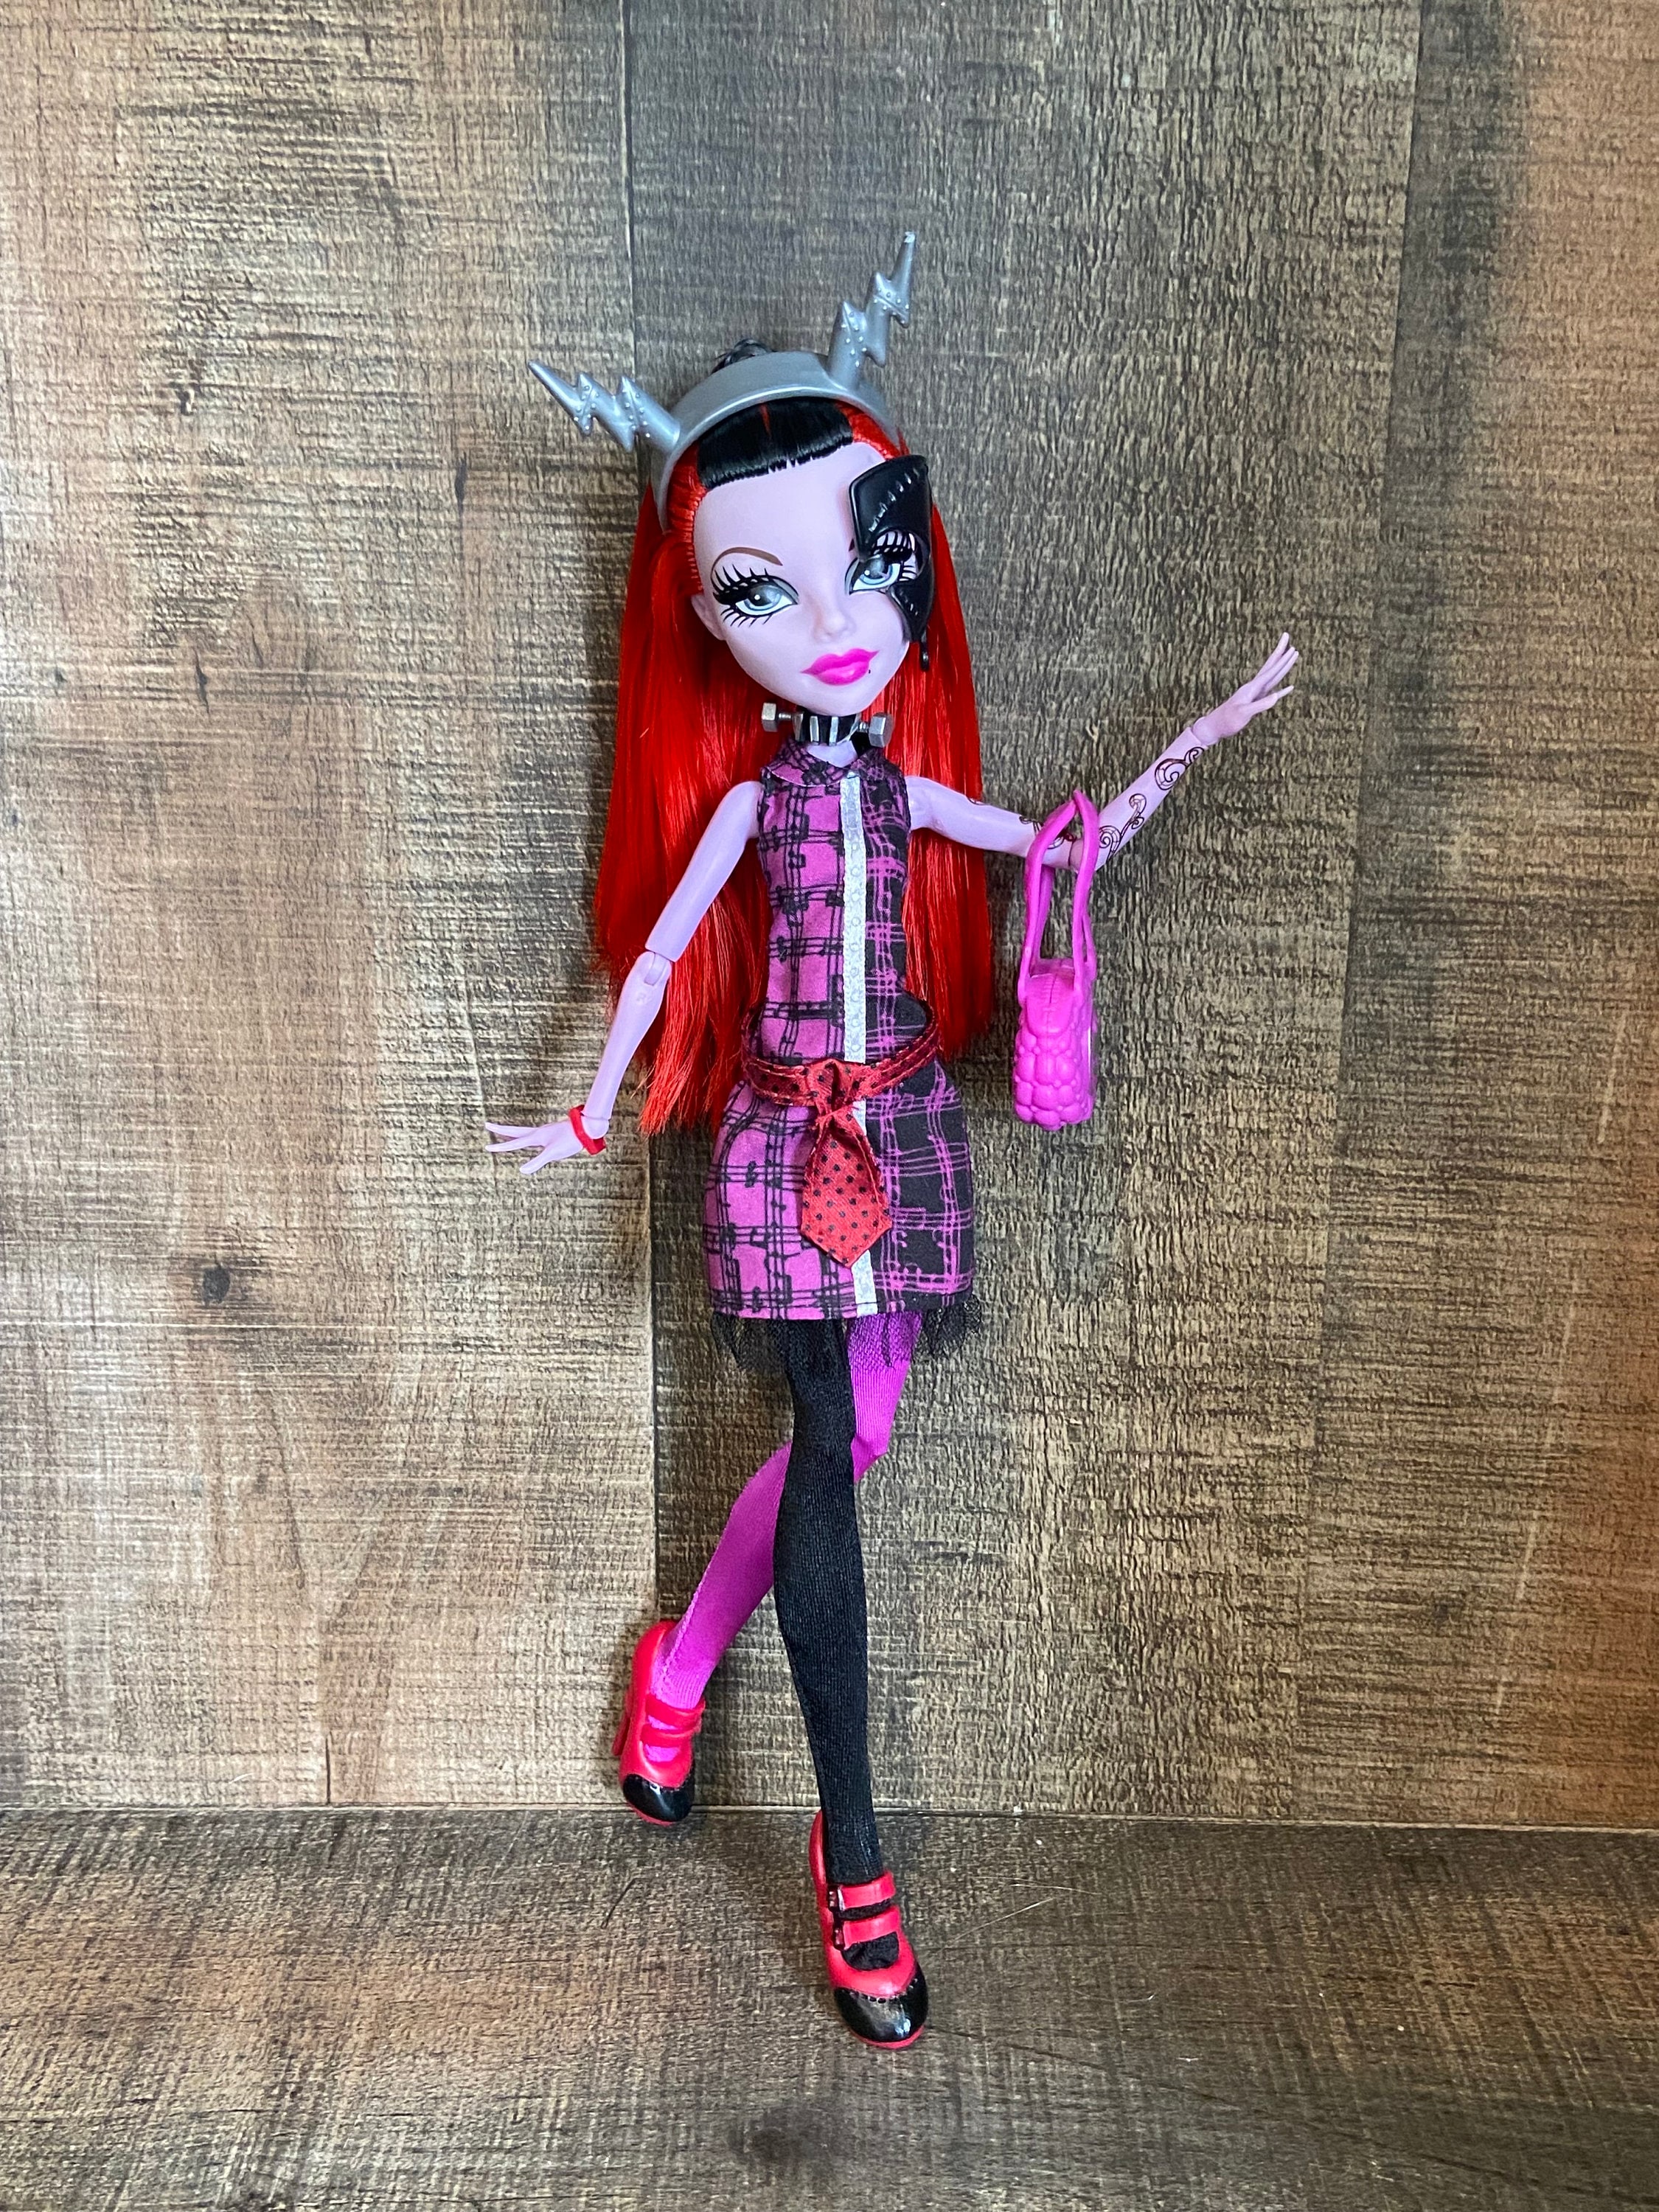 Freaky-Flawless — slightly redesigned the freak du chic clawdeen's